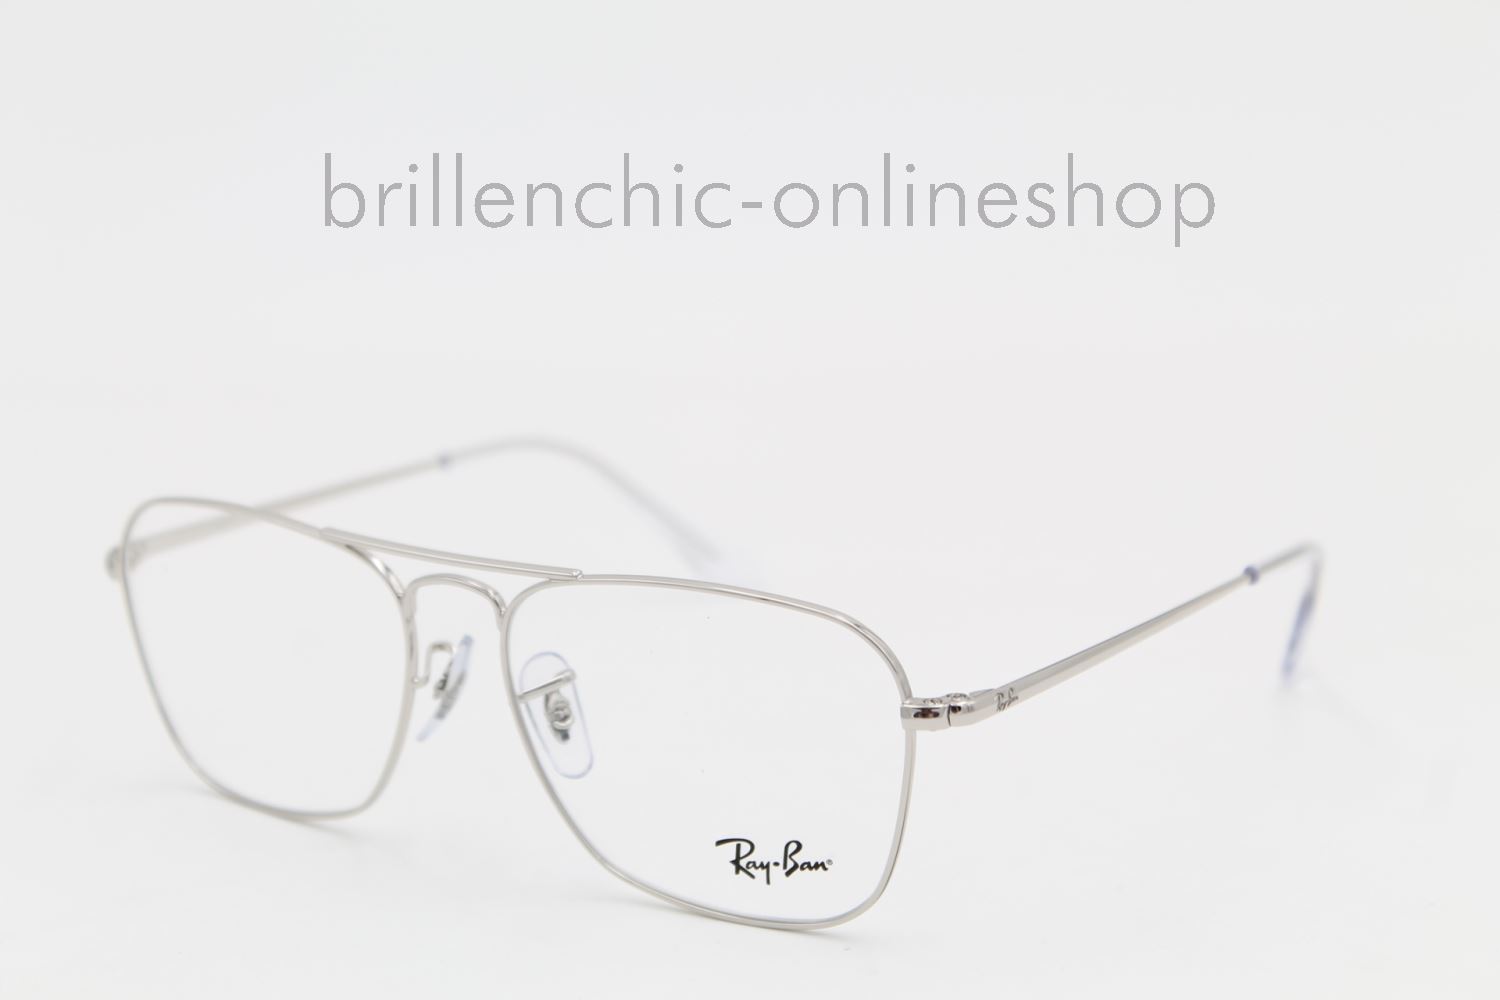 Brillenchic-onlineshop in Berlin - Ray Ban RB 6536 2501 